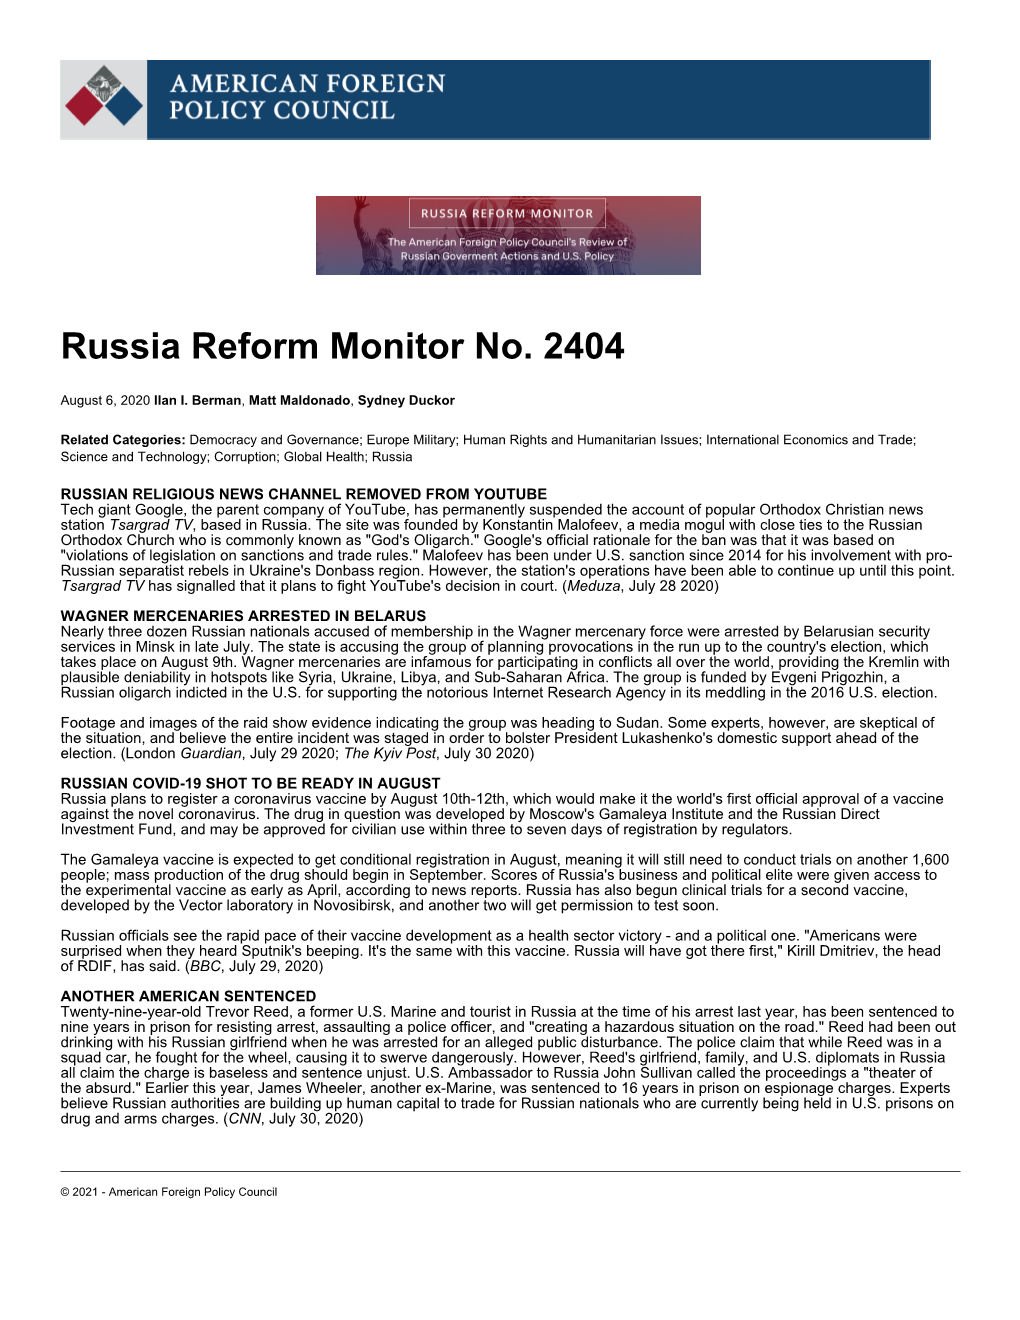 Russia Reform Monitor No. 2404 | American Foreign Policy Council